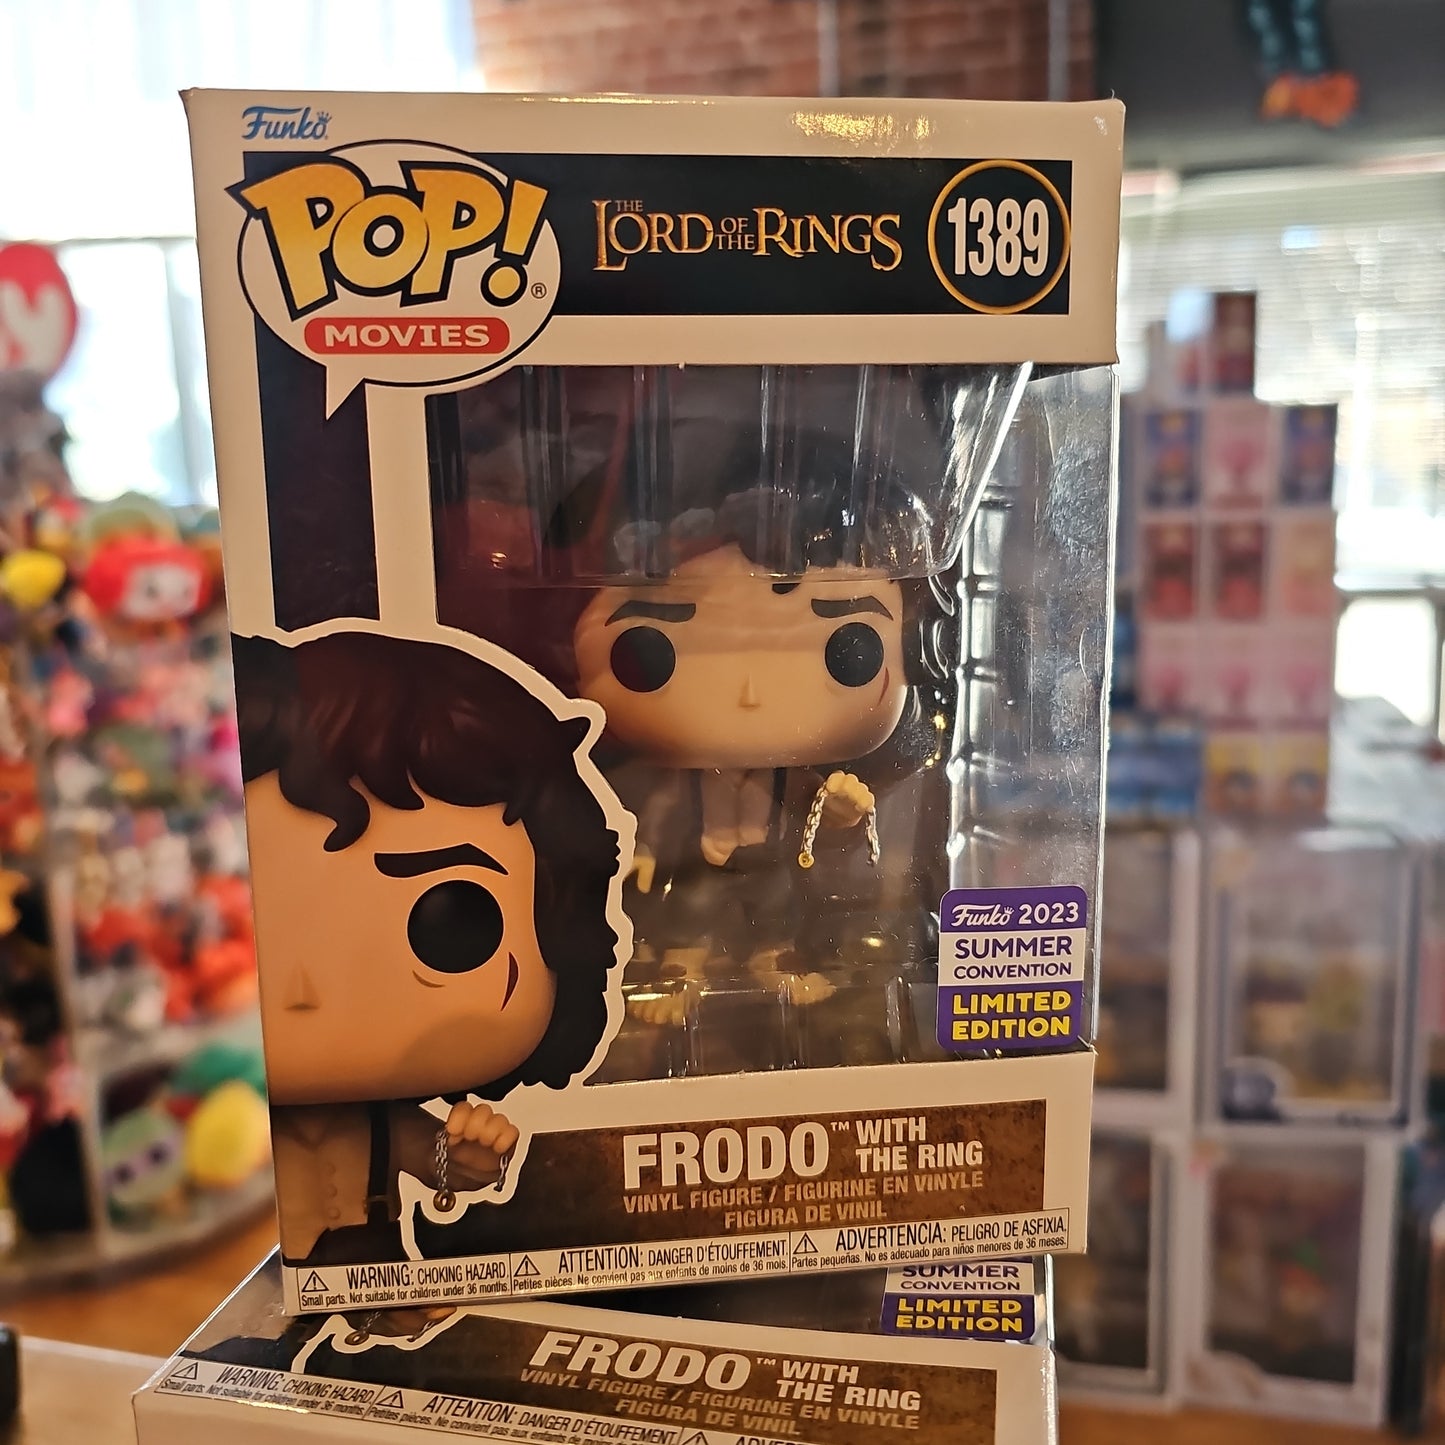 Lord of the Rings - Frodo with Ring #1389 - Funko Pop Vinyl Figure (movies)